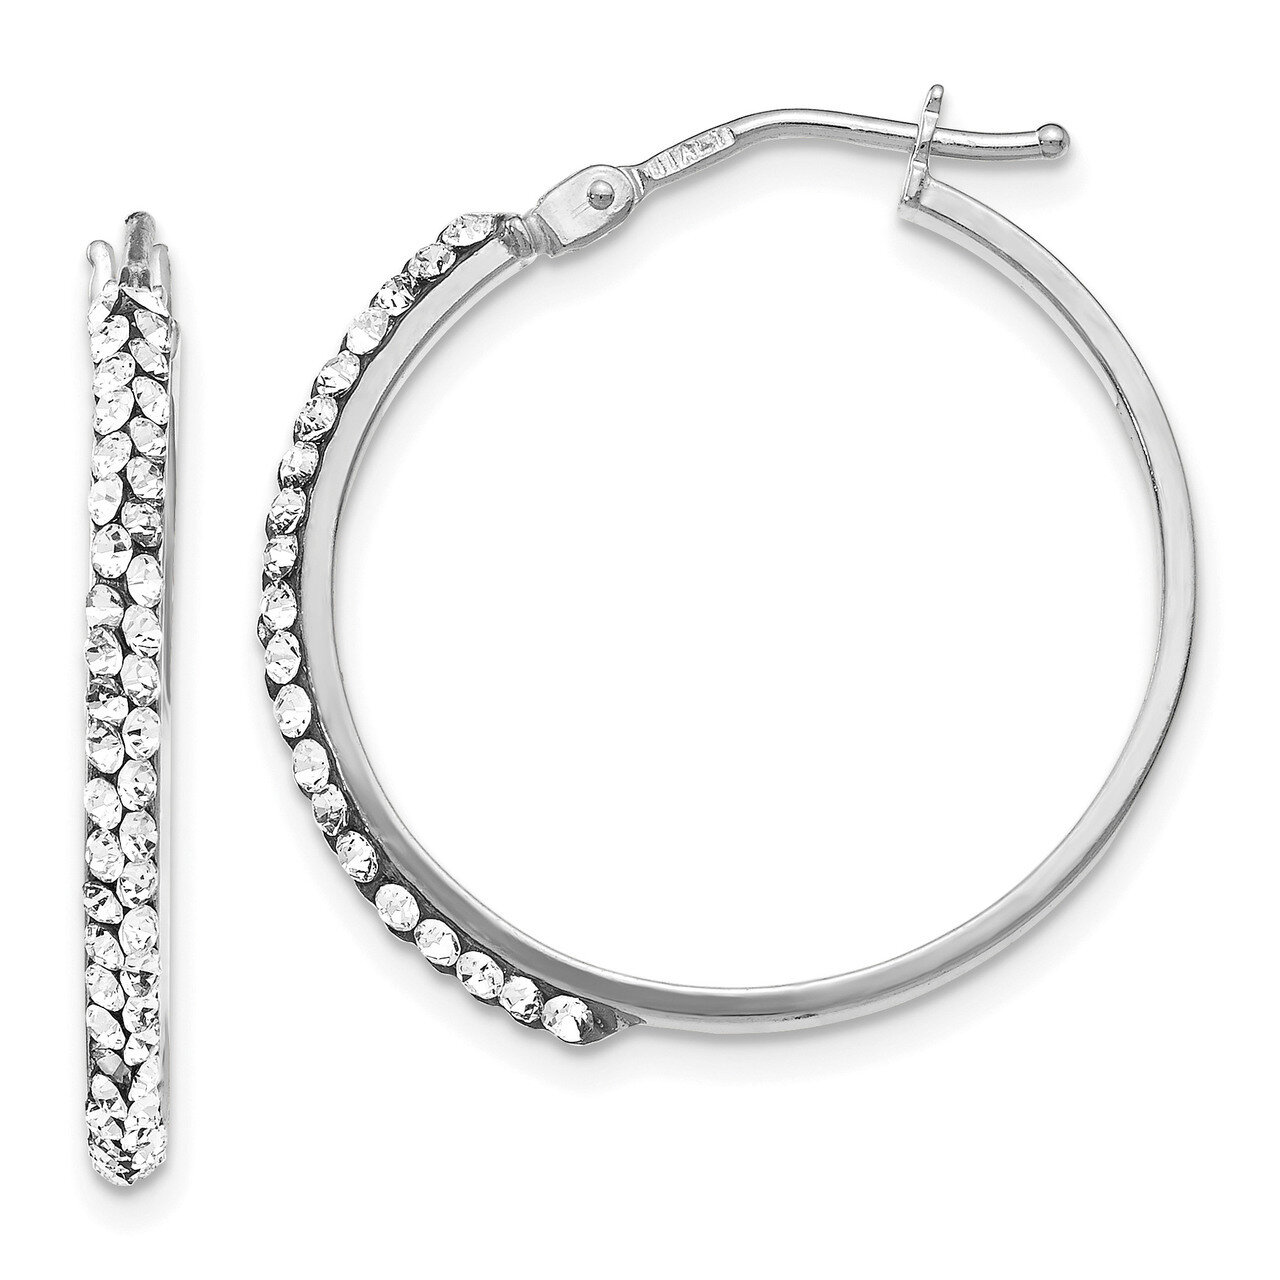 Crystals from Swarovski Polished Hoop Earrings 14K White Gold HB-LE1011